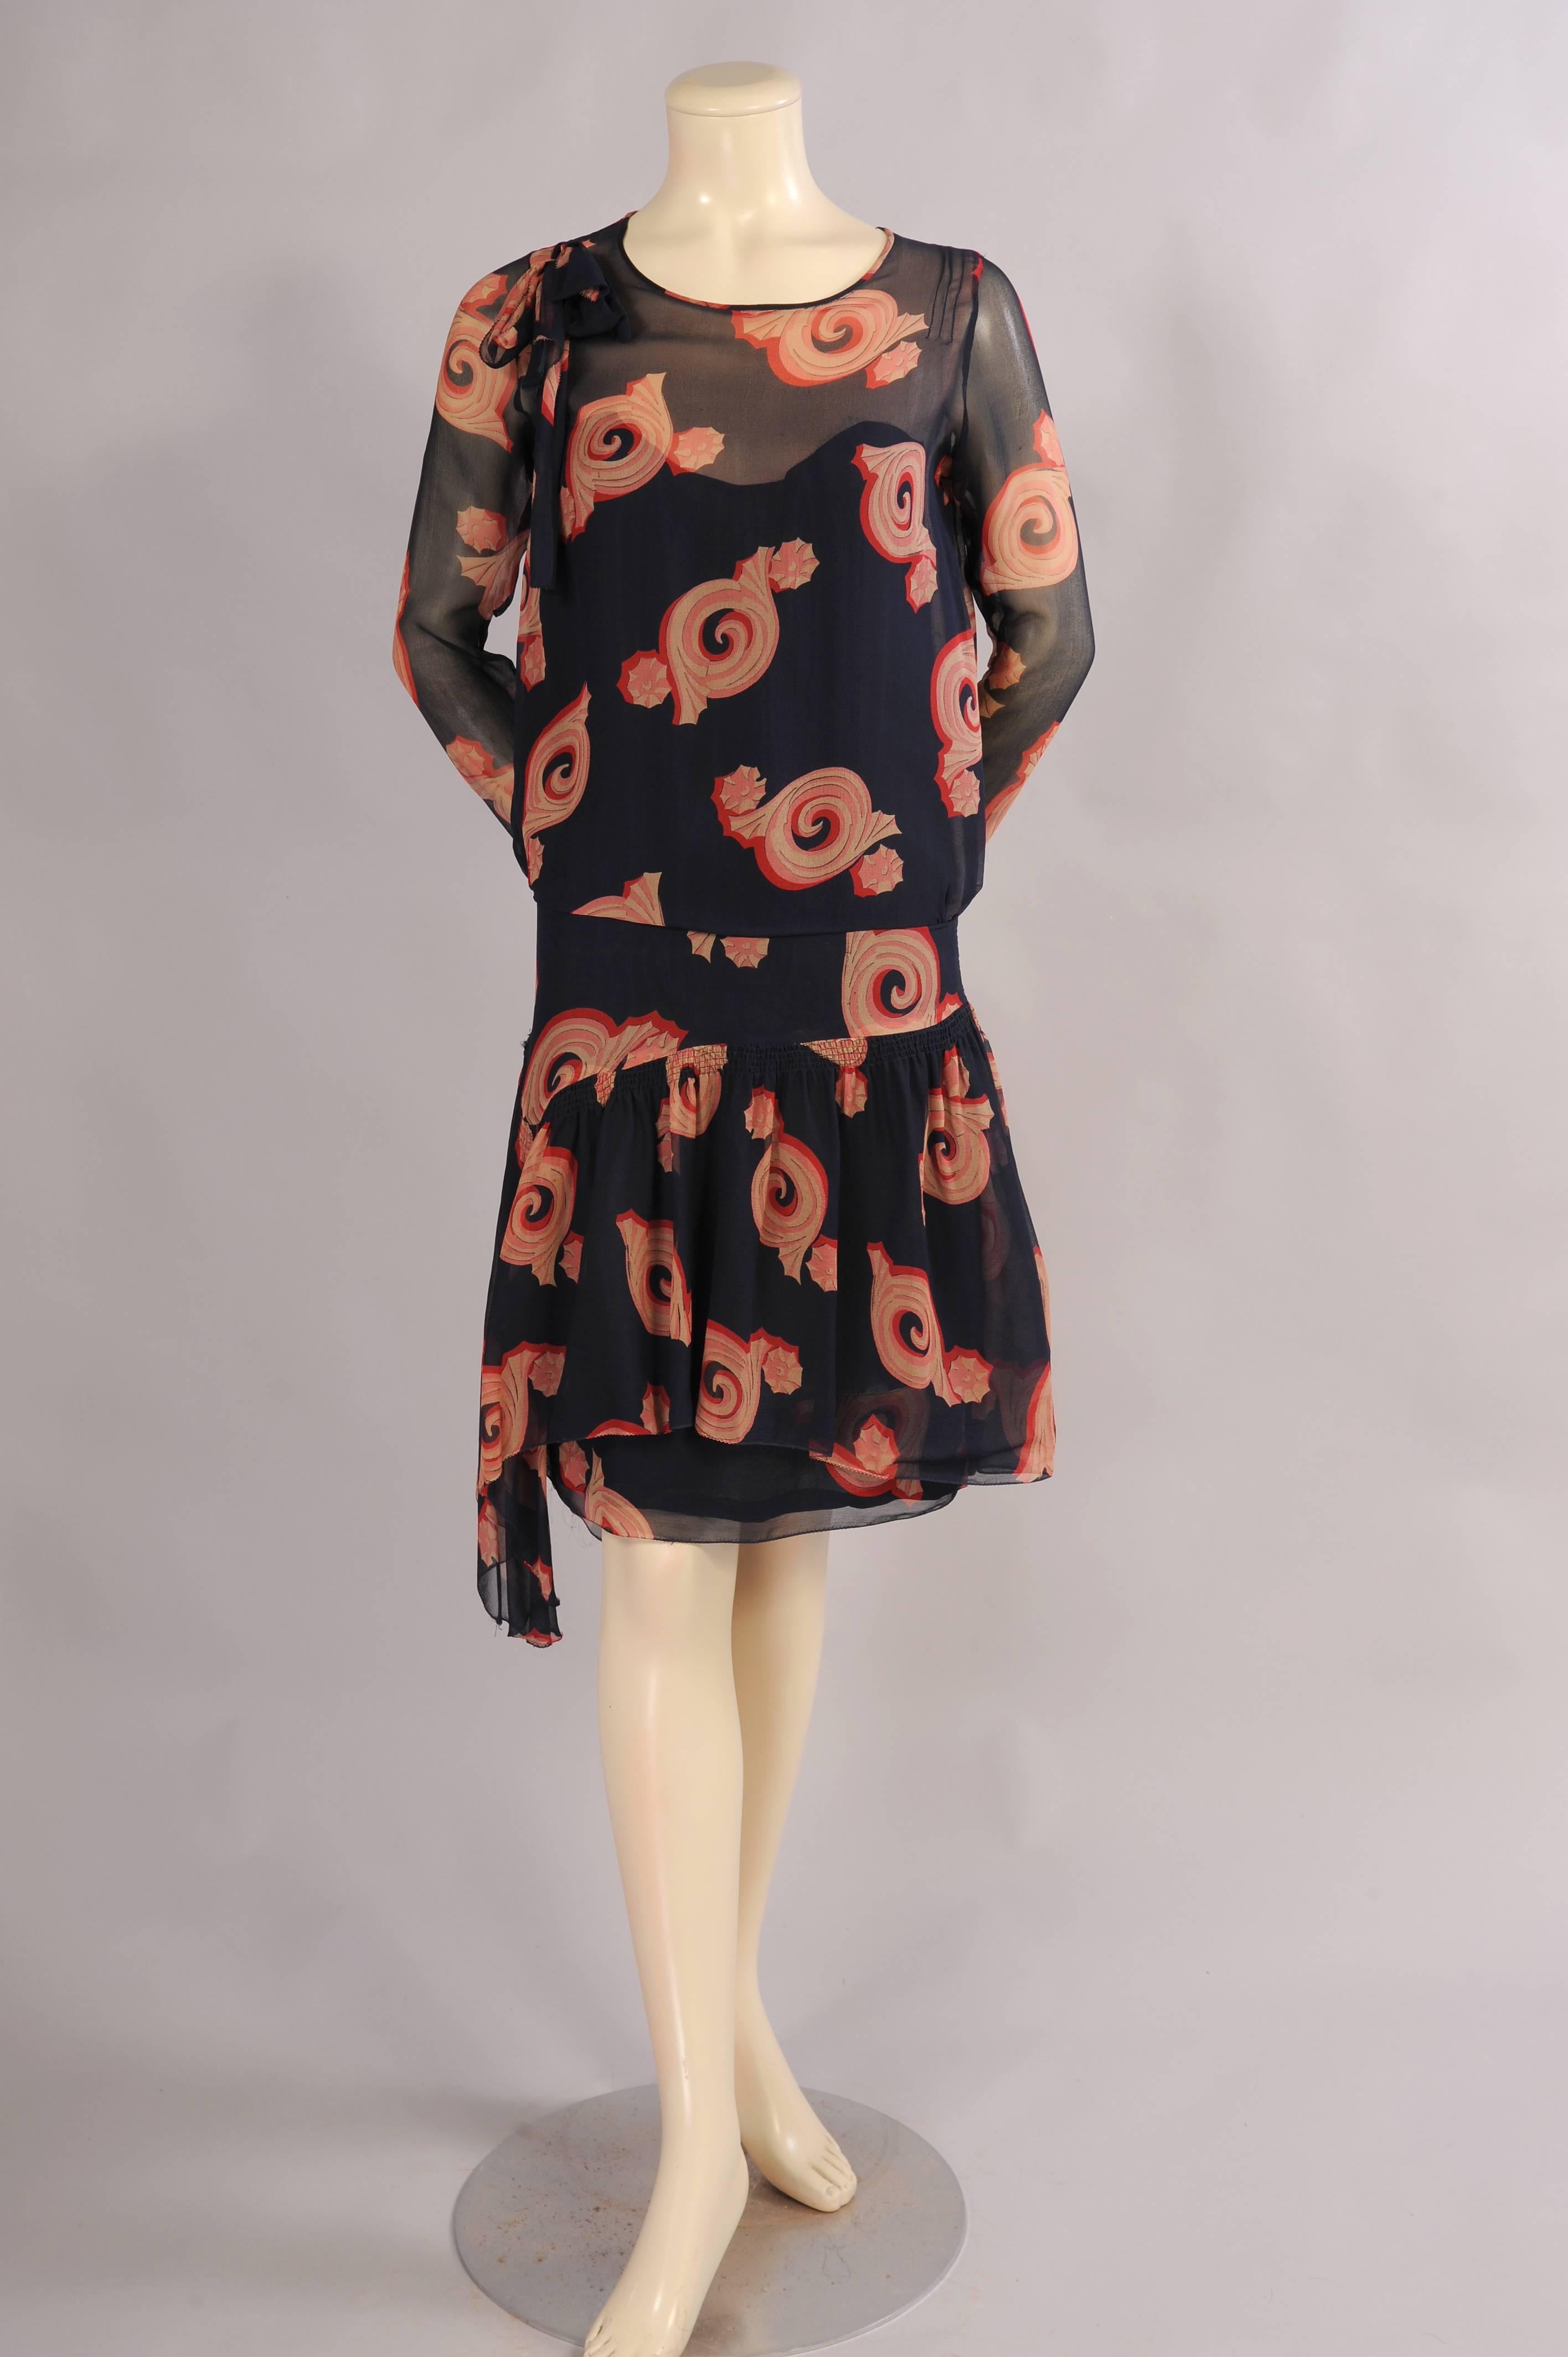 Navy blue silk chiffon is printed with an Art Deco design in red, pink and beige.
The dress has a bow on the right shoulder, long sleeves, a dropped waist  with a wide flat panel over the hips and a gathered skirt that dips lower on the right side.